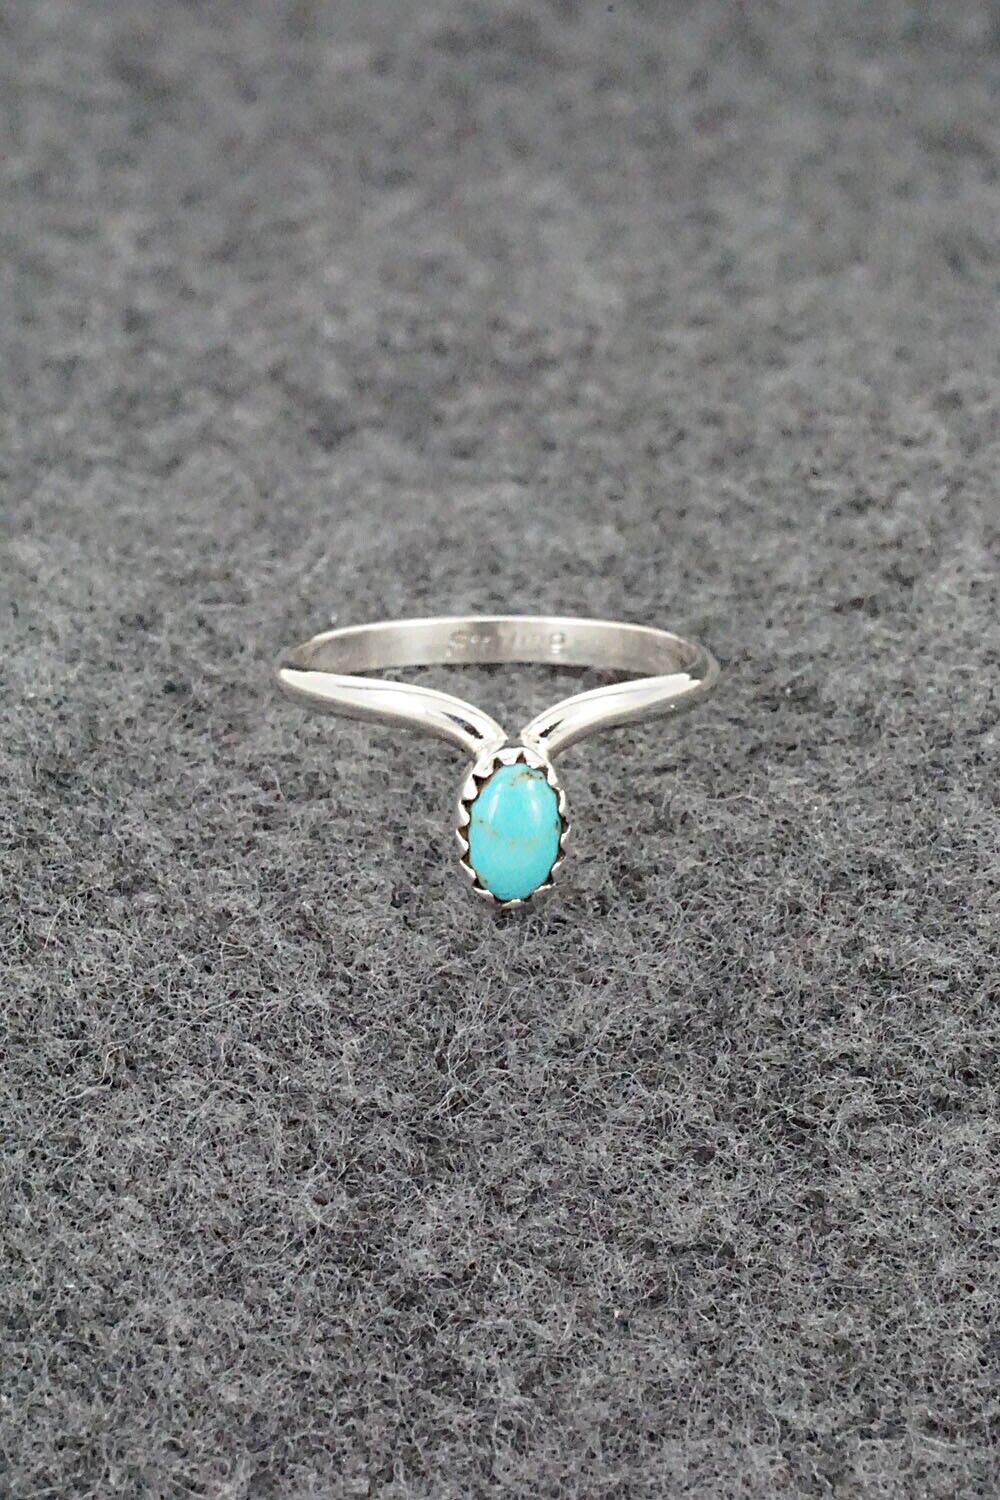 Turquoise & Sterling Silver Ring - Hiram Largo - Size 7